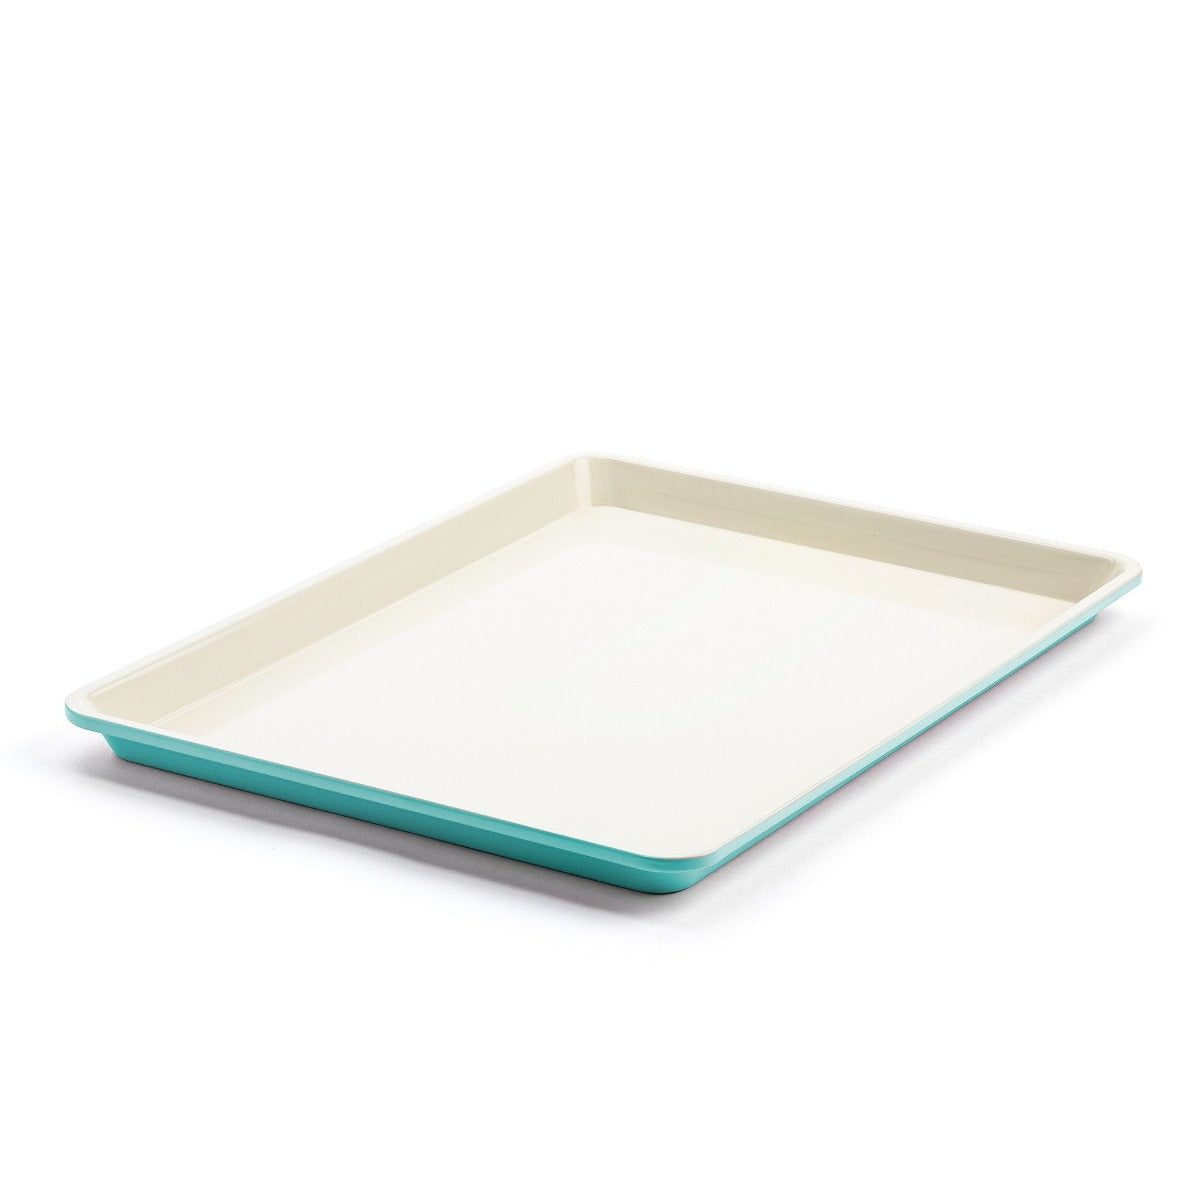 GreenLife Ceramic Non-Stick Cookie Sheet Turquoise